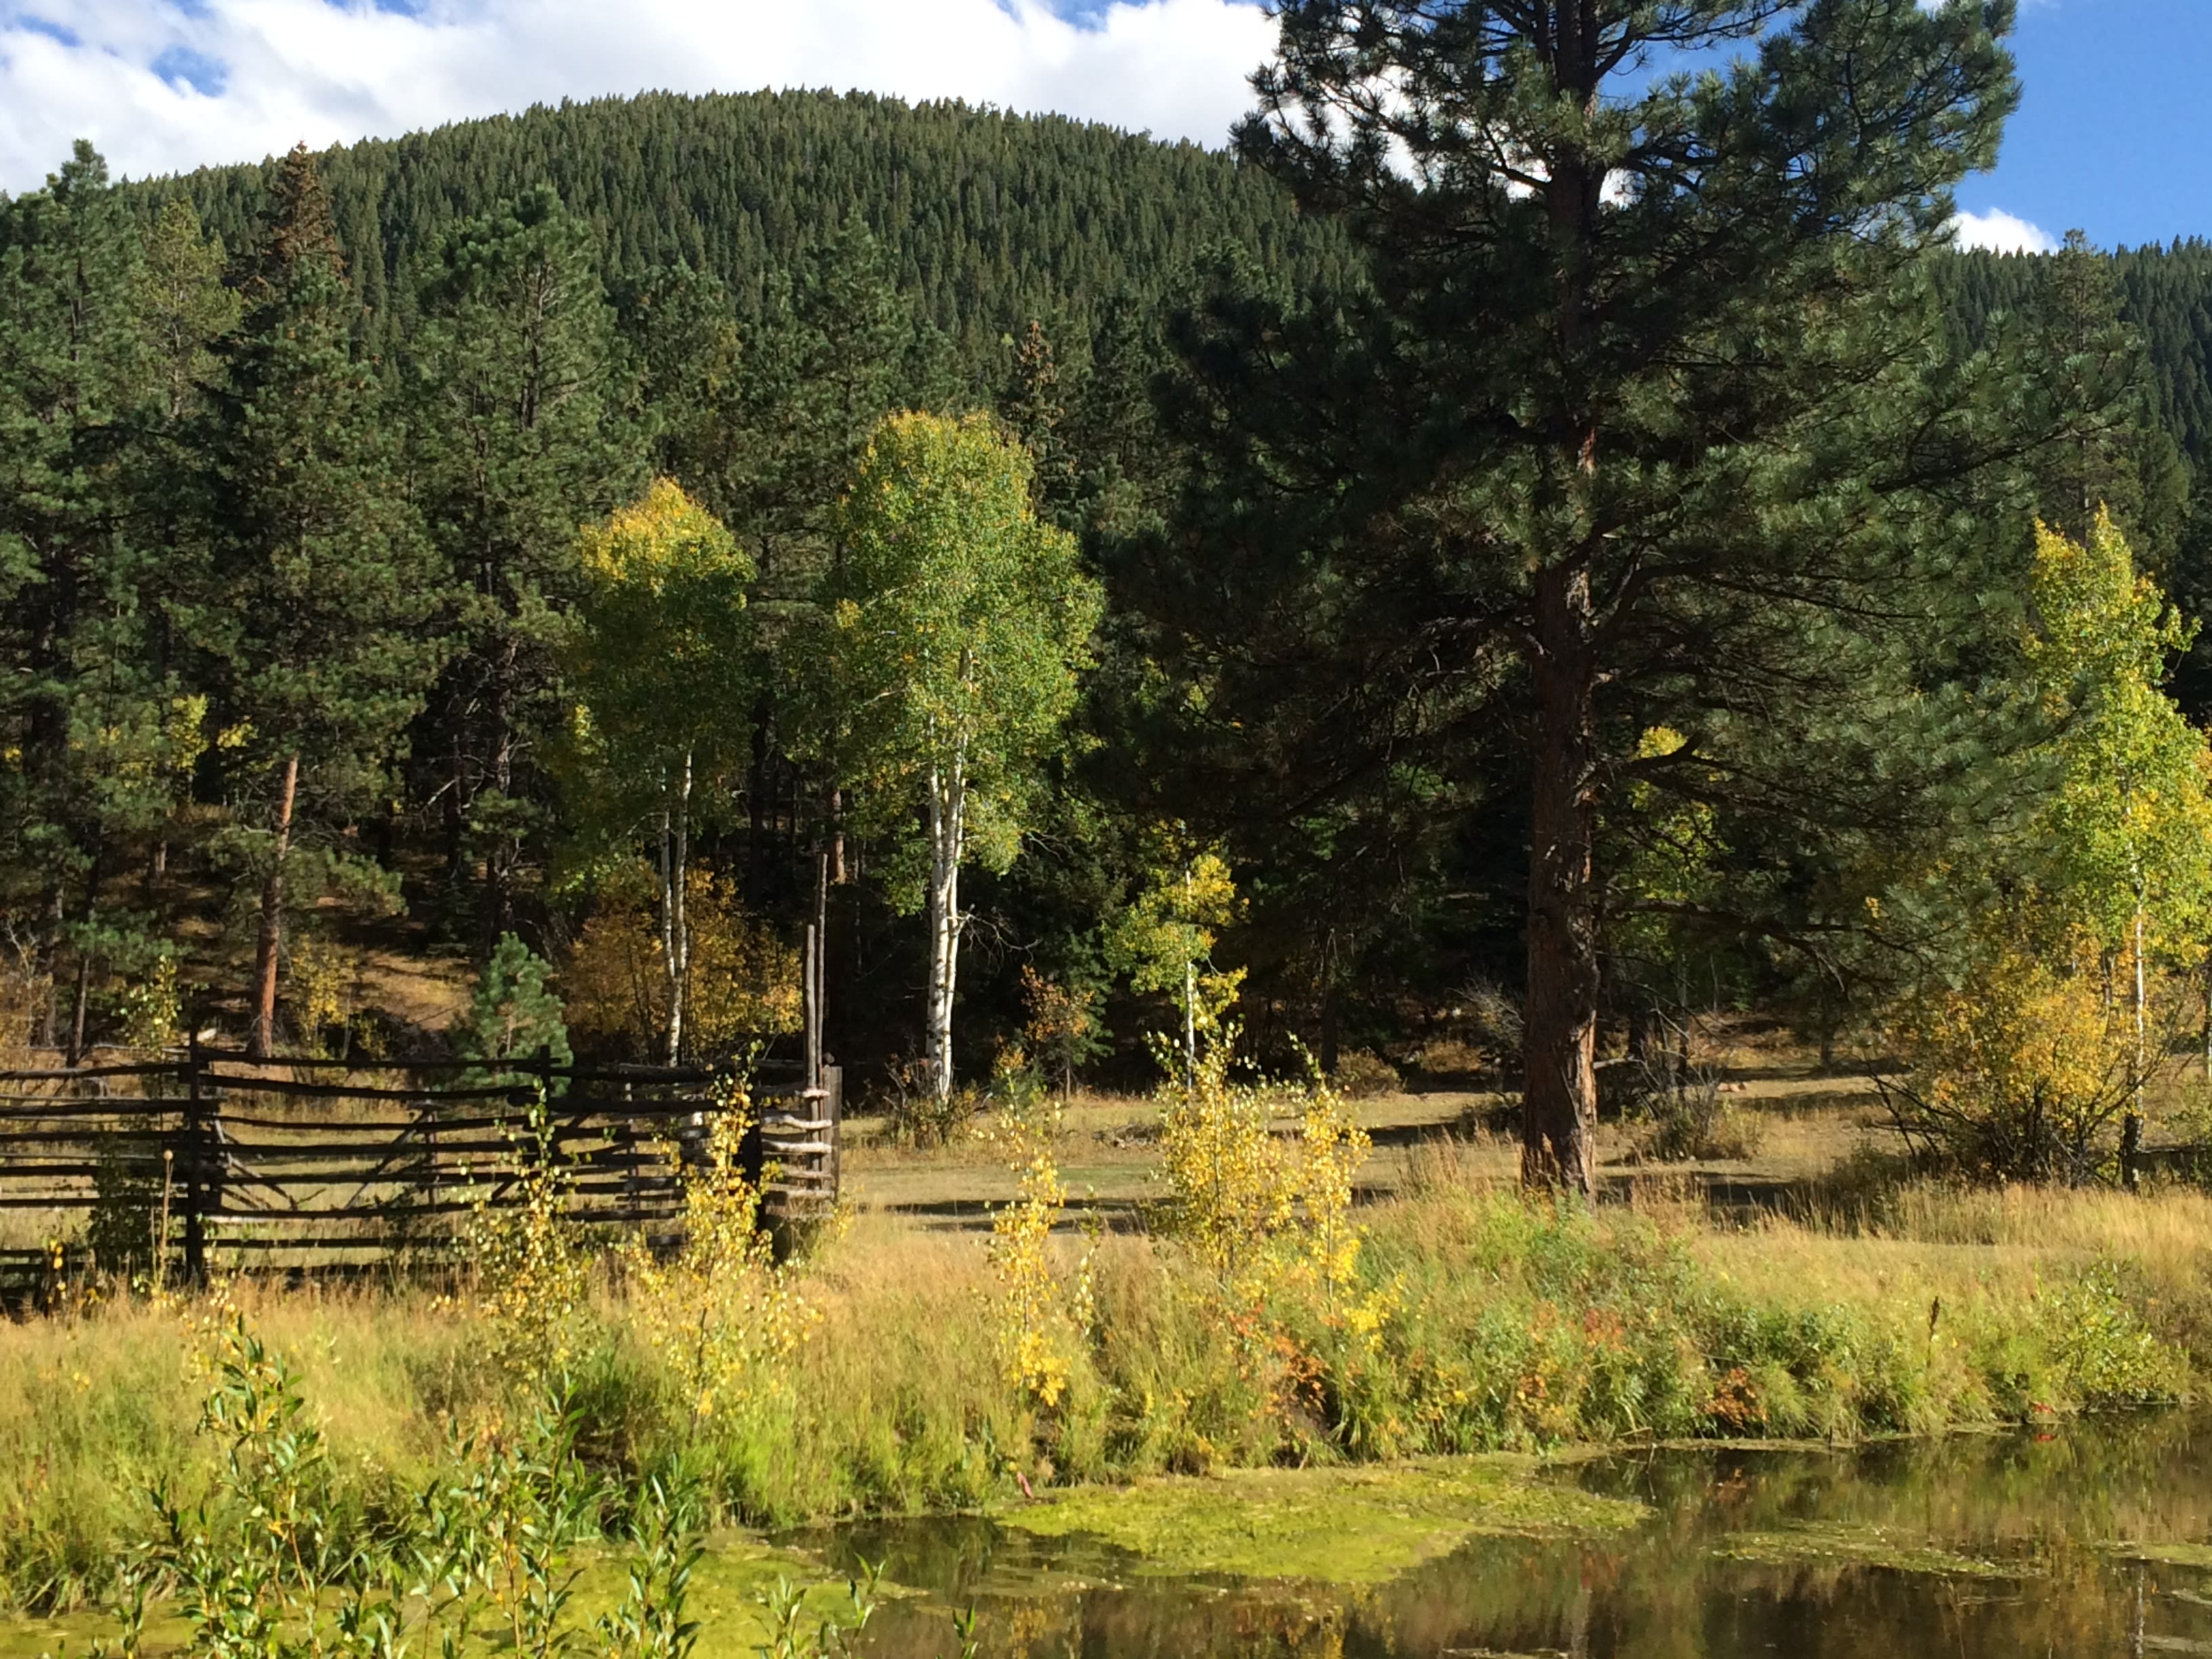 The old Corral and pond from the main ranch road.